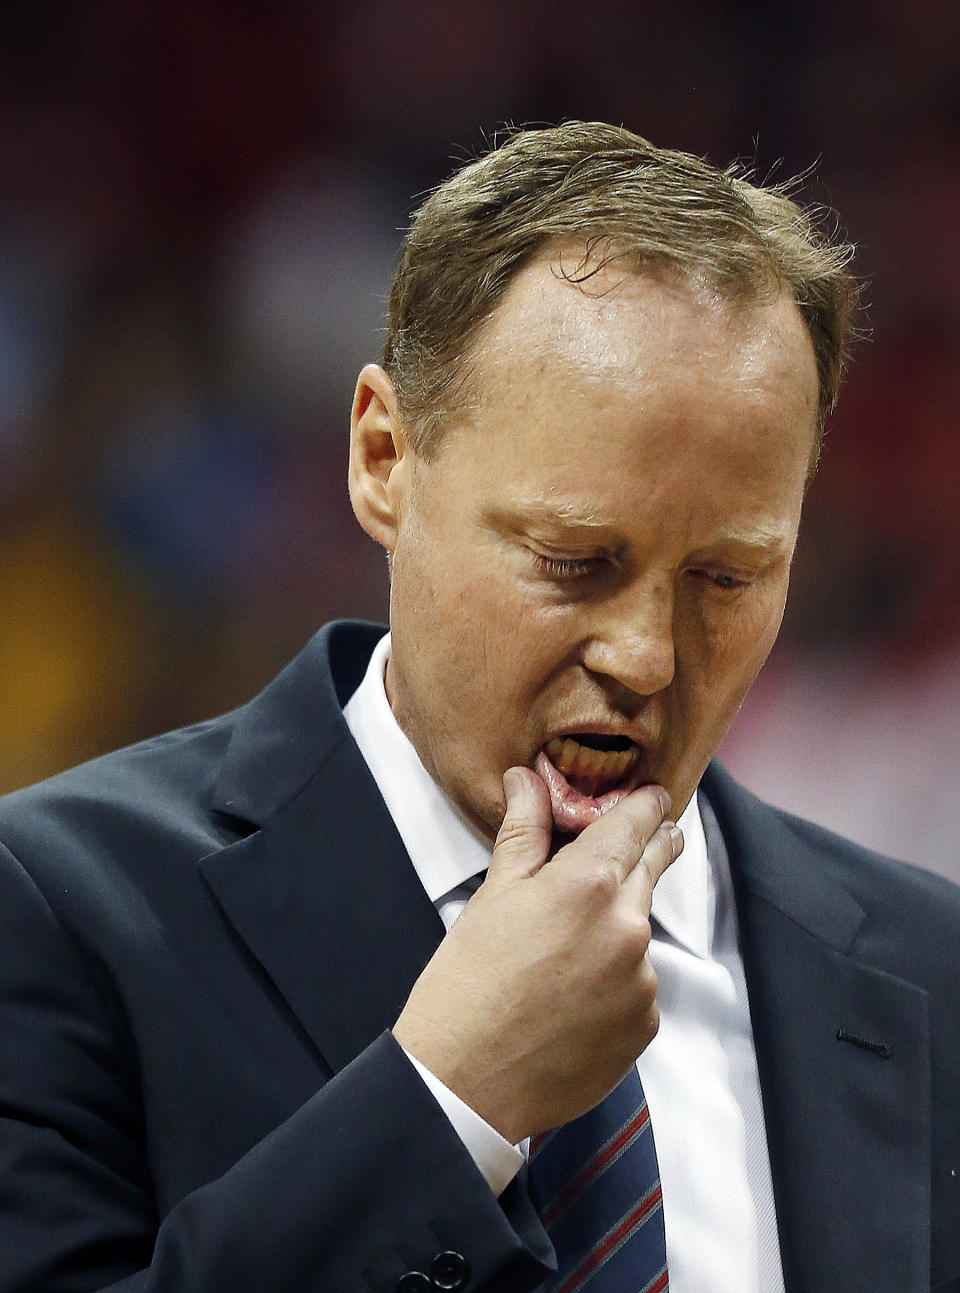 Atlanta Hawks head coach Mike Budenholzer prepares to speak to his players during a timeout in the second half of Game 6 of a first-round NBA basketball playoff series against the Indiana Pacers in Atlanta, Thursday, May 1, 2014. Indiana won 95-88. (AP Photo/John Bazemore)